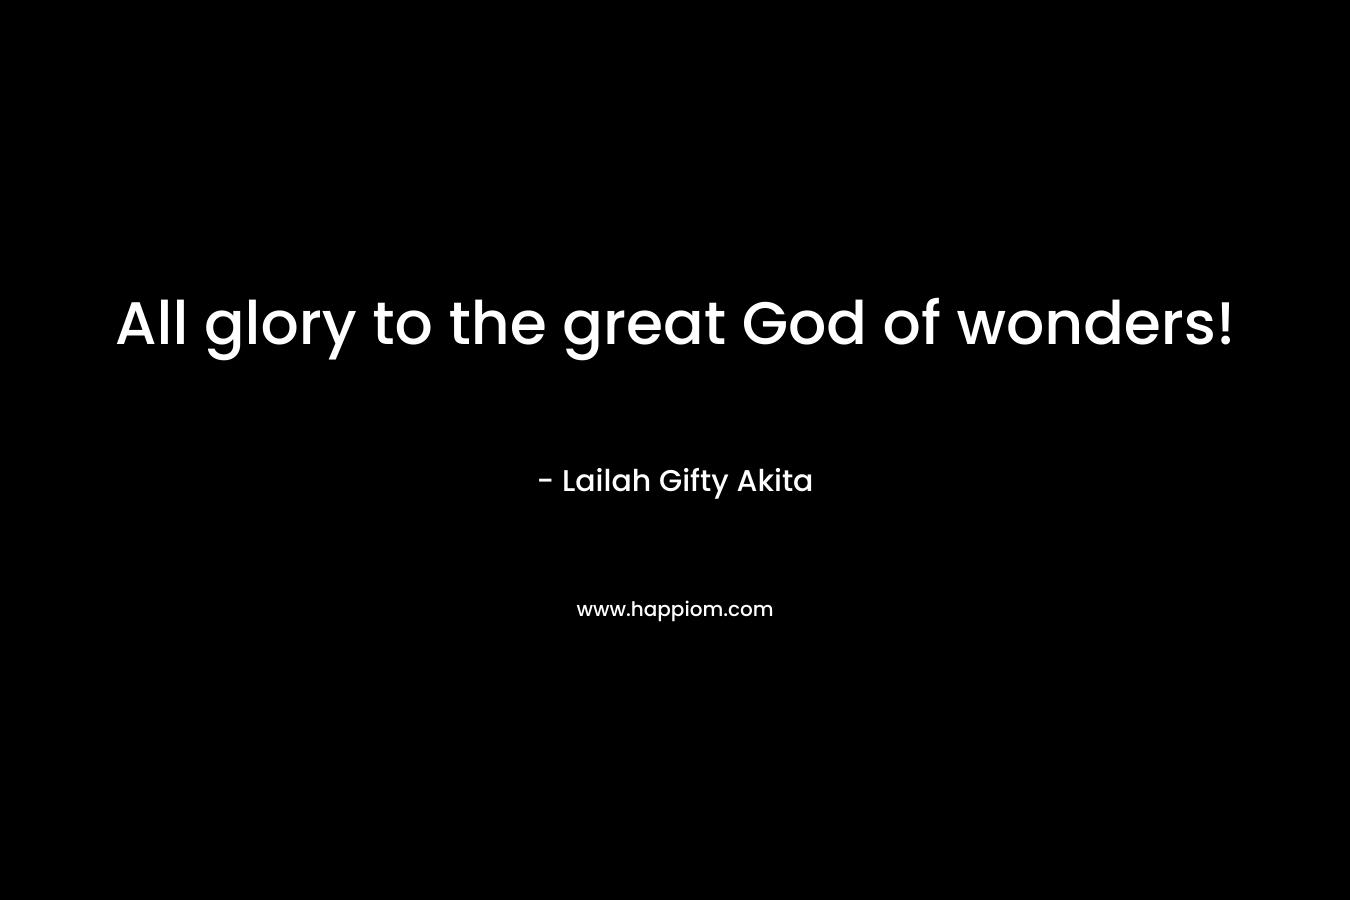 All glory to the great God of wonders!